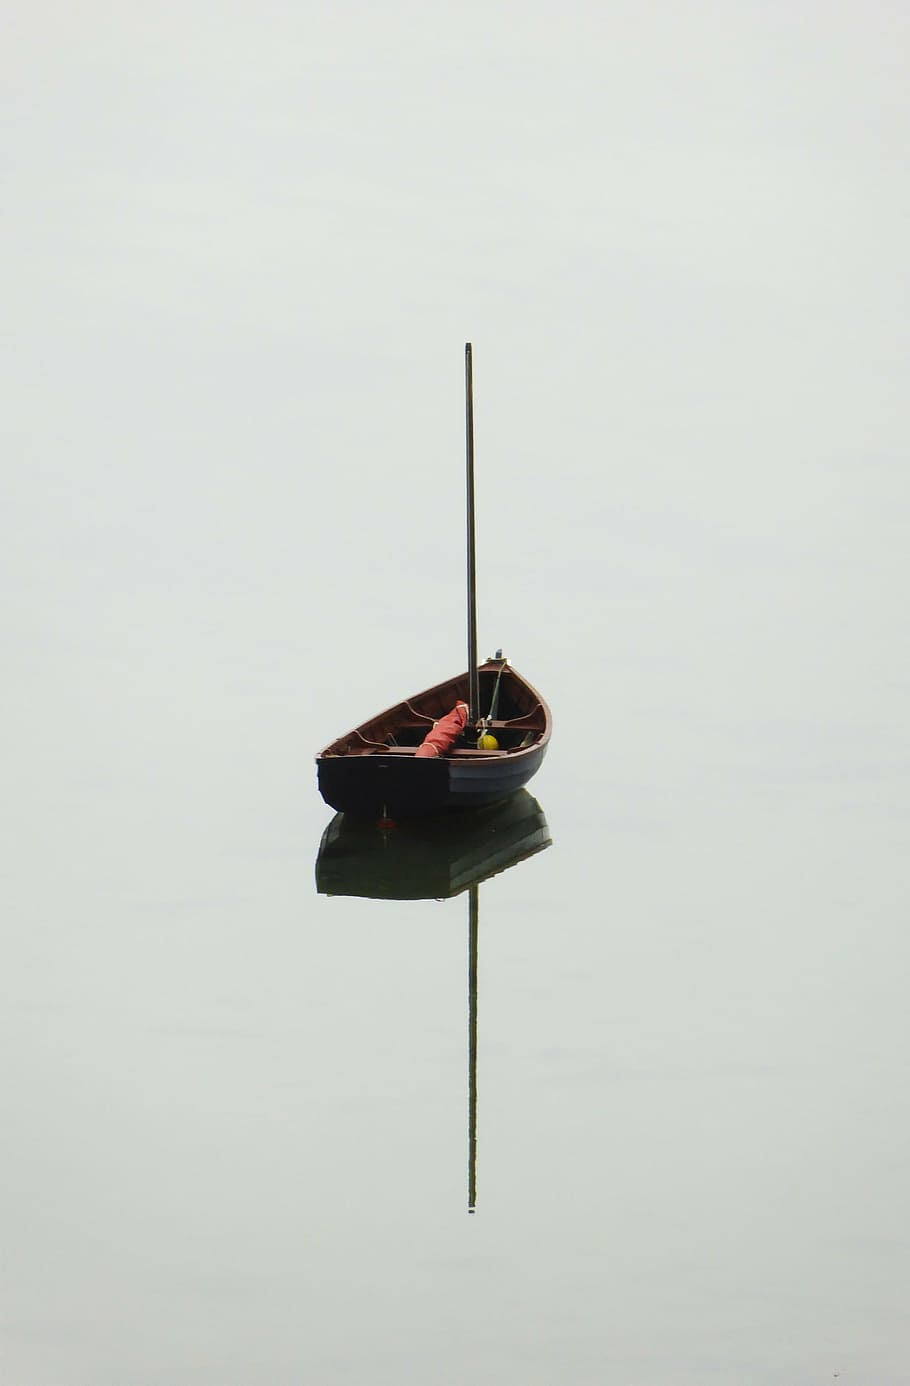 brown, boat, body, water, lake, reflection, calm, tranquil, serene, mast